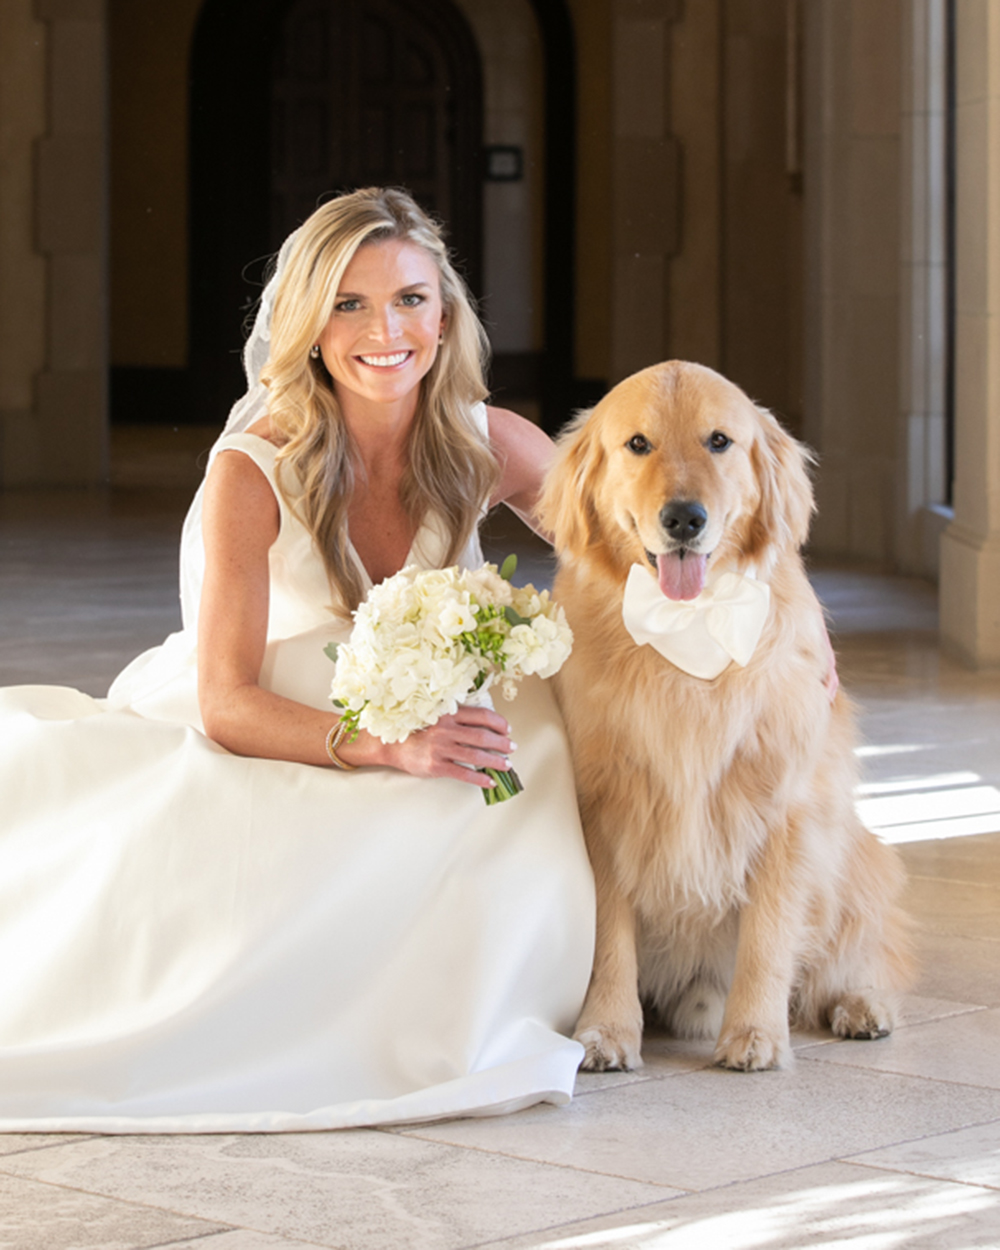 Kelly’s Bridal Portraits at the Dallas Country Club